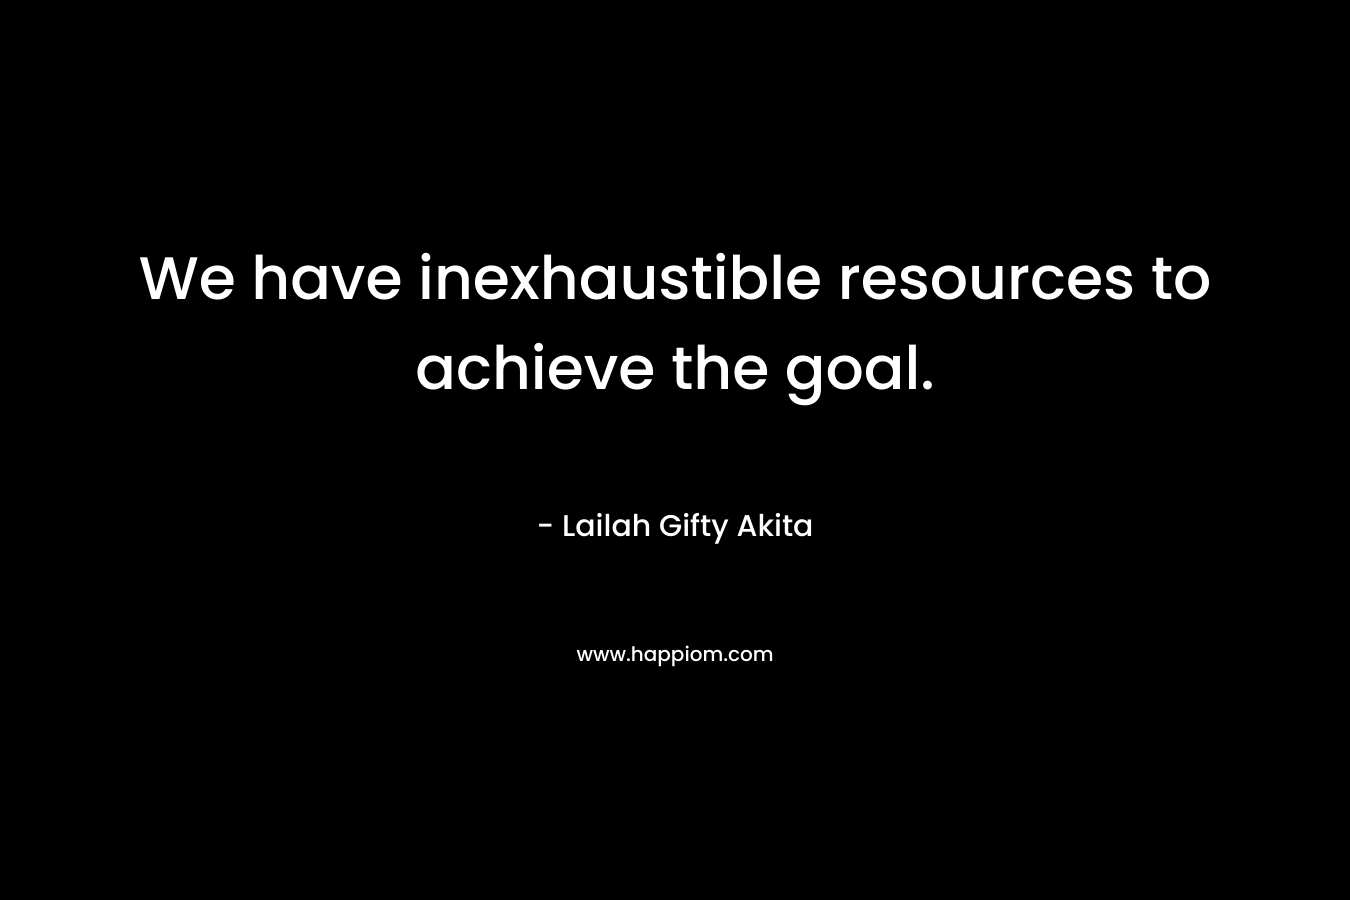 We have inexhaustible resources to achieve the goal.